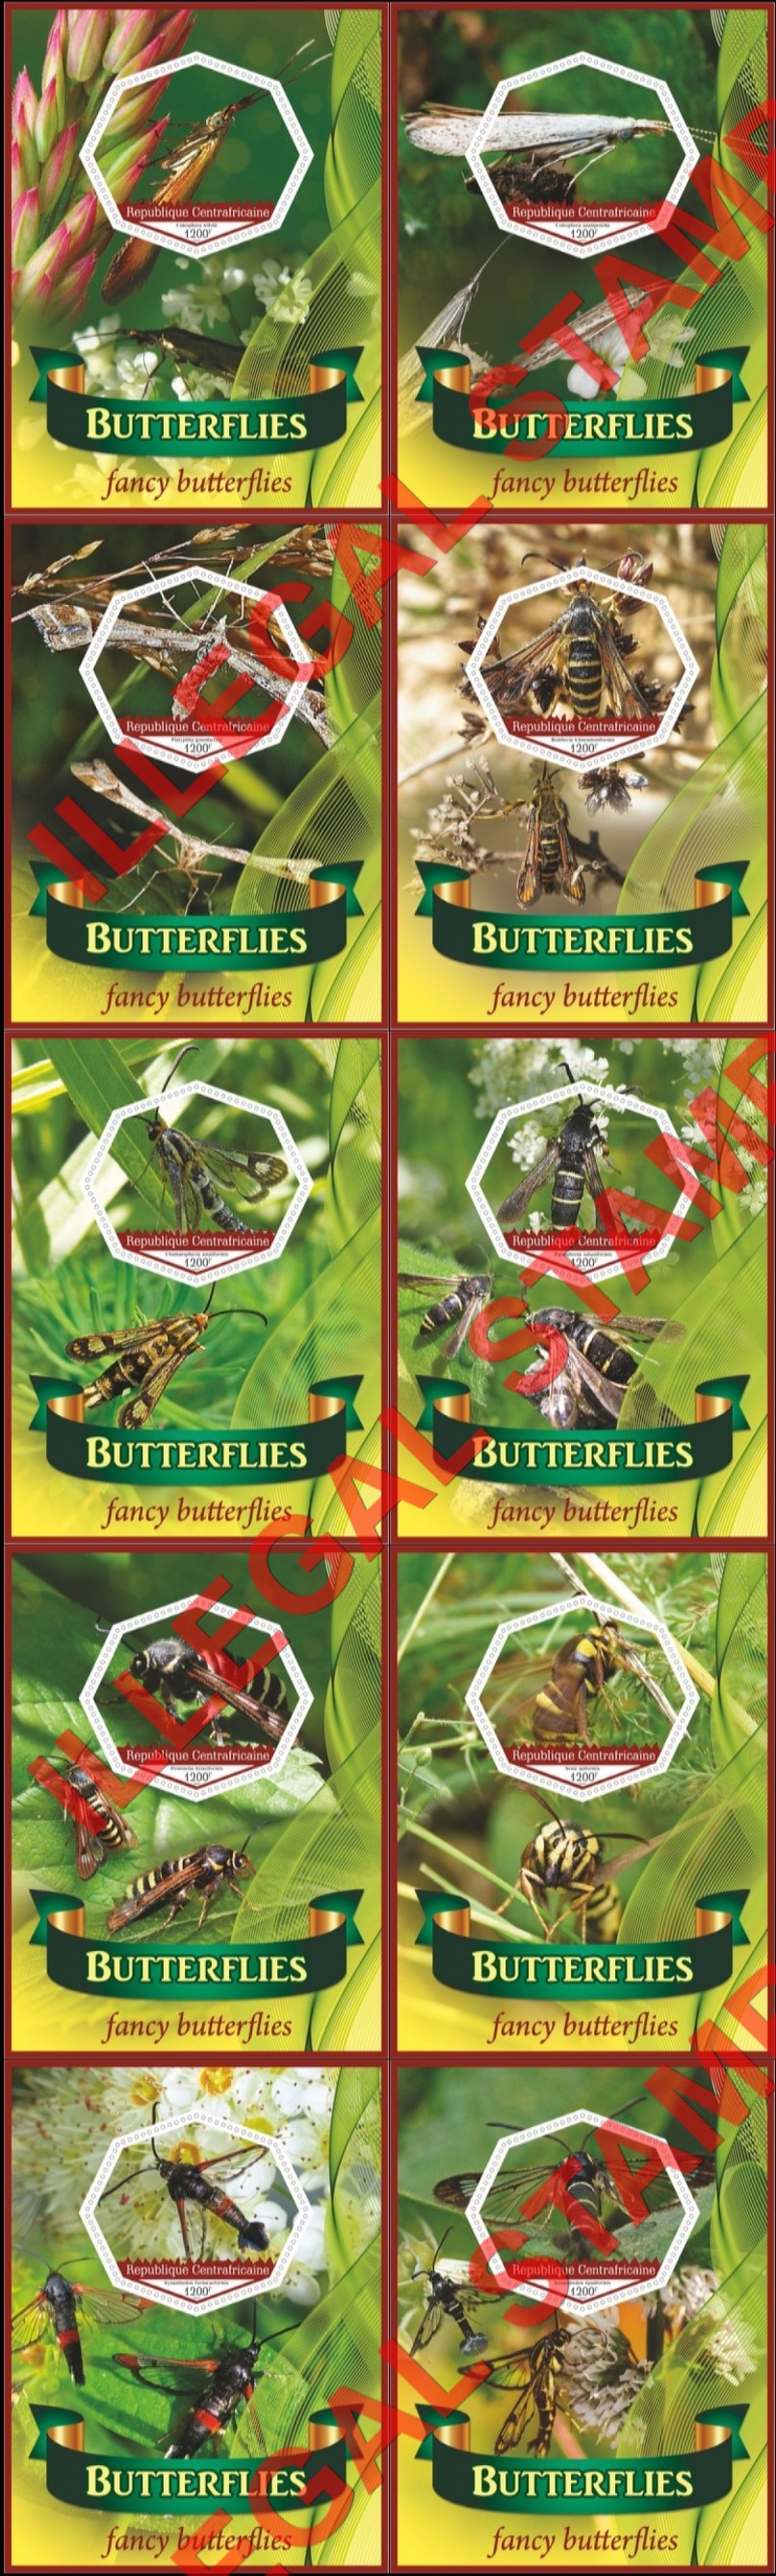 Central African Republic 2020 Butterflies (different) Illegal Stamp Souvenir Sheets of 1